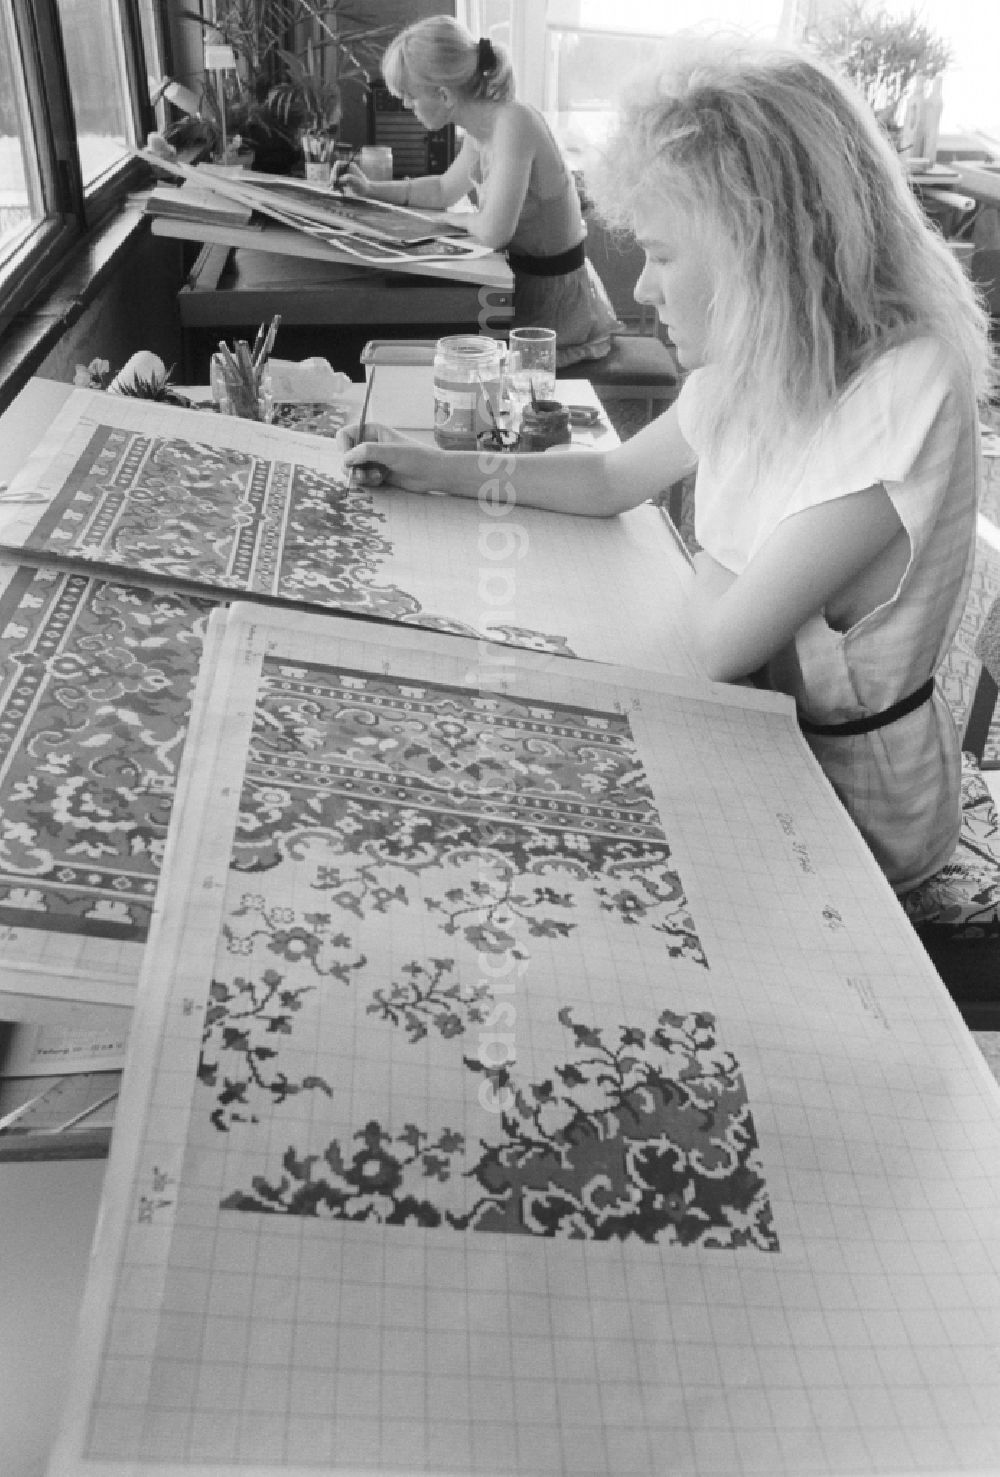 GDR picture archive: Malchow - Employees of the development department of VEB Carpet Factory North Malchow in Malchow in Mecklenburg-Western Pomerania in the field of the former GDR, German Democratic Republic. Here new patterns are designed for carpets